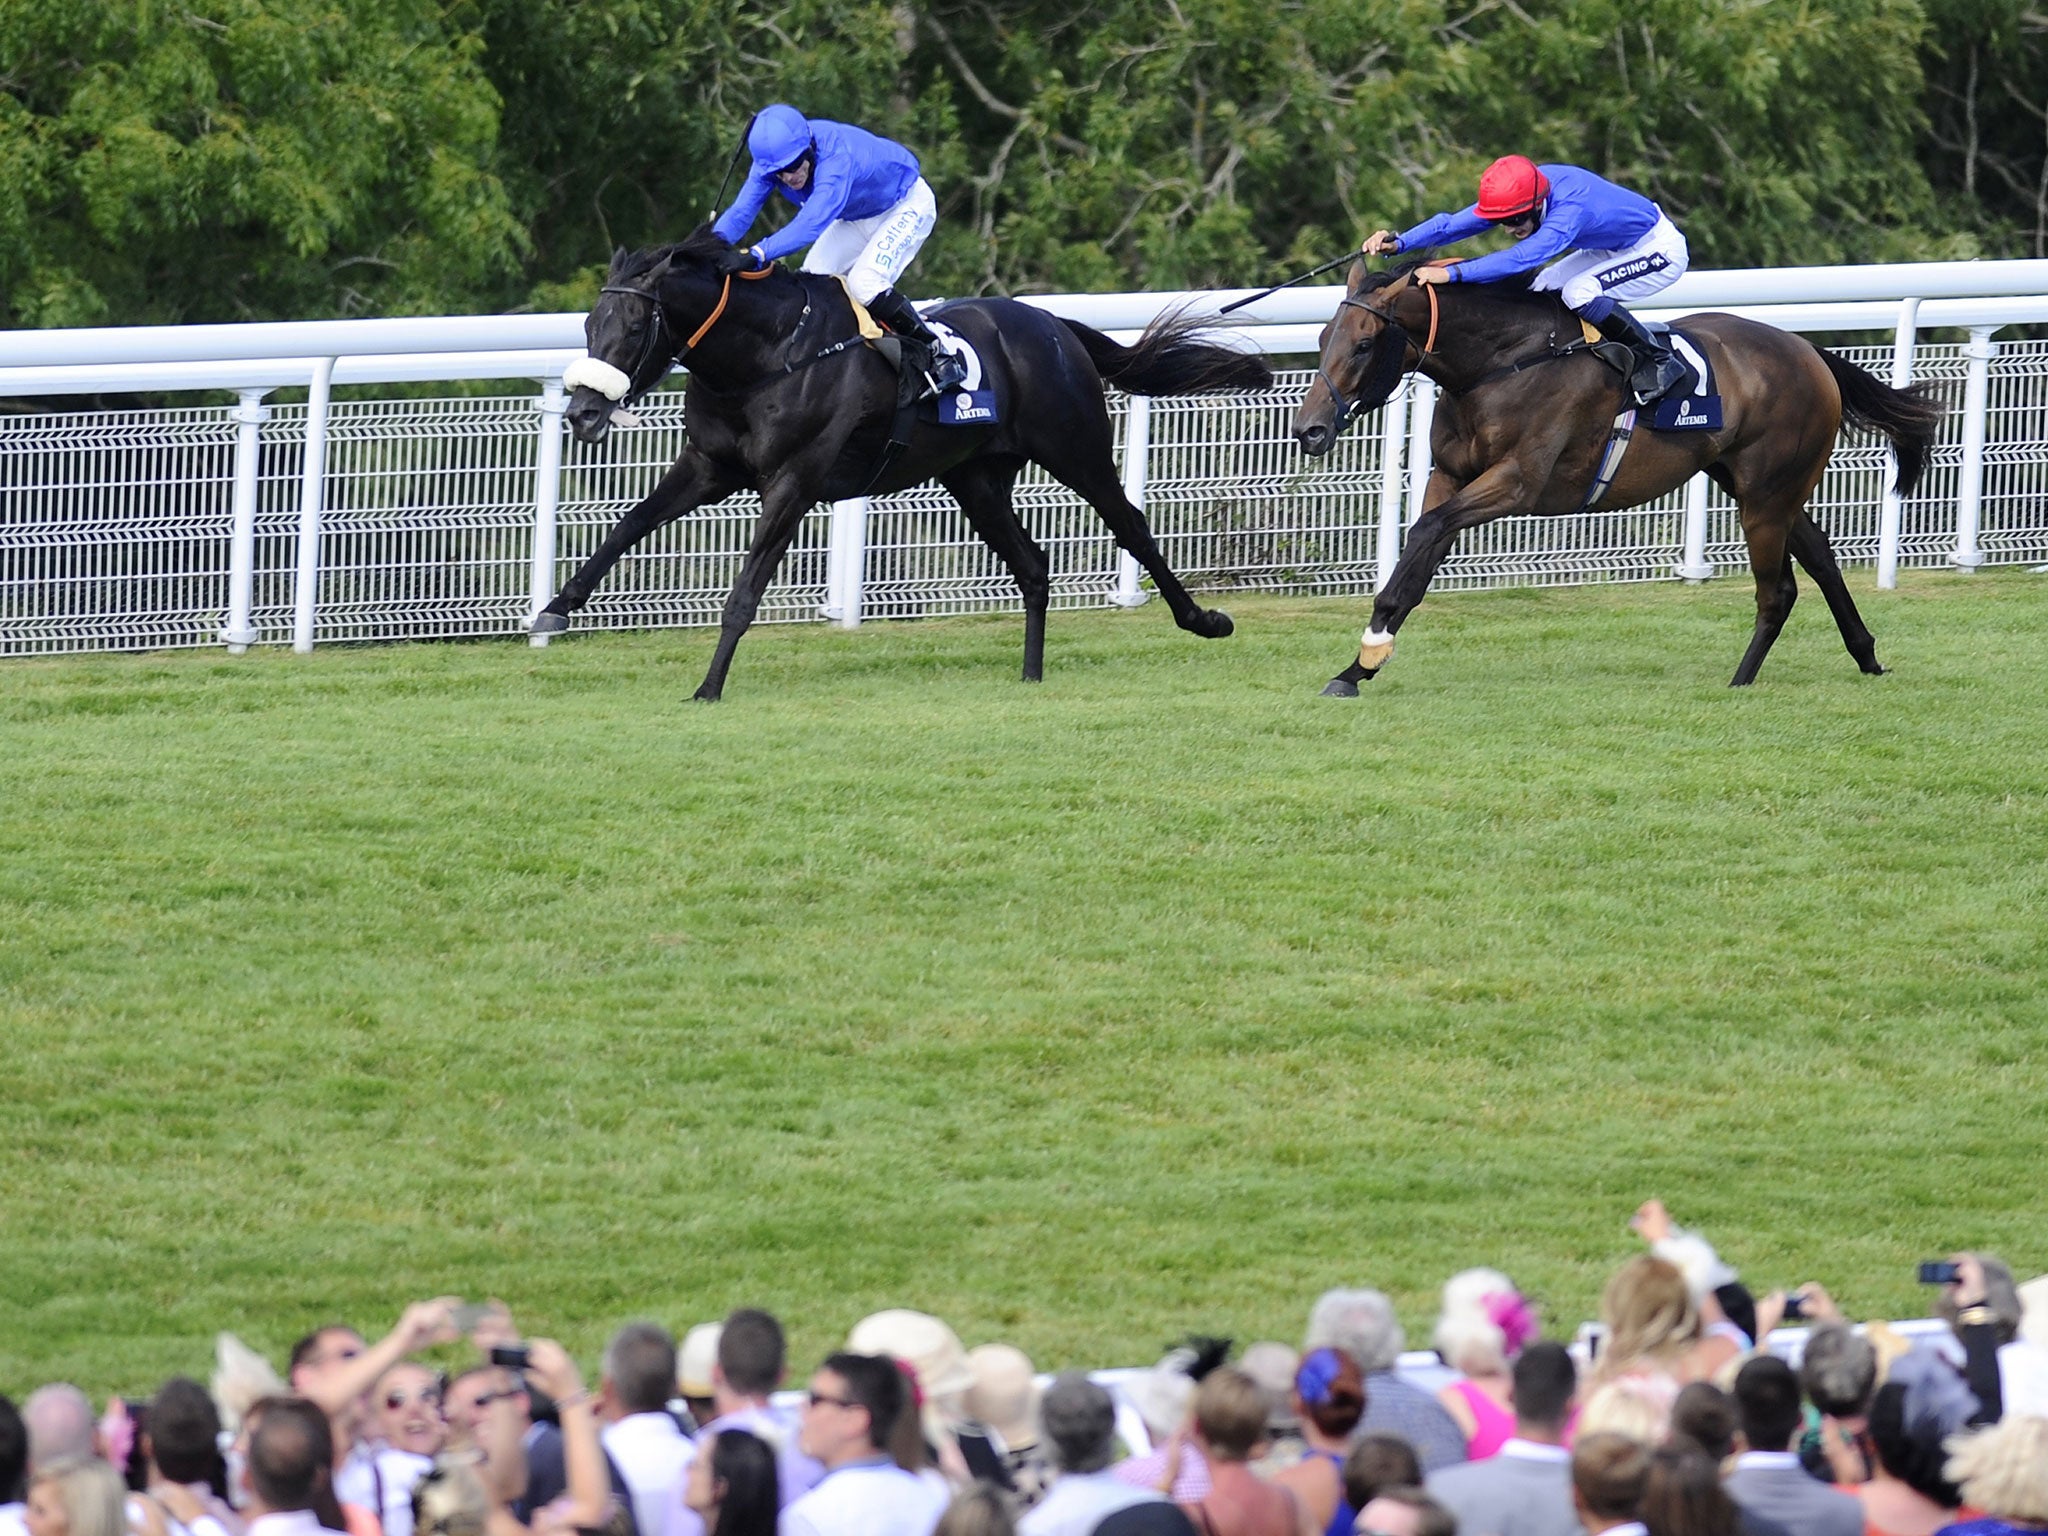 Ireland’s Kieren Fallon rides the Godolphin-trained horse
Cavalryman to victory in the Goodwood Cup yesterday